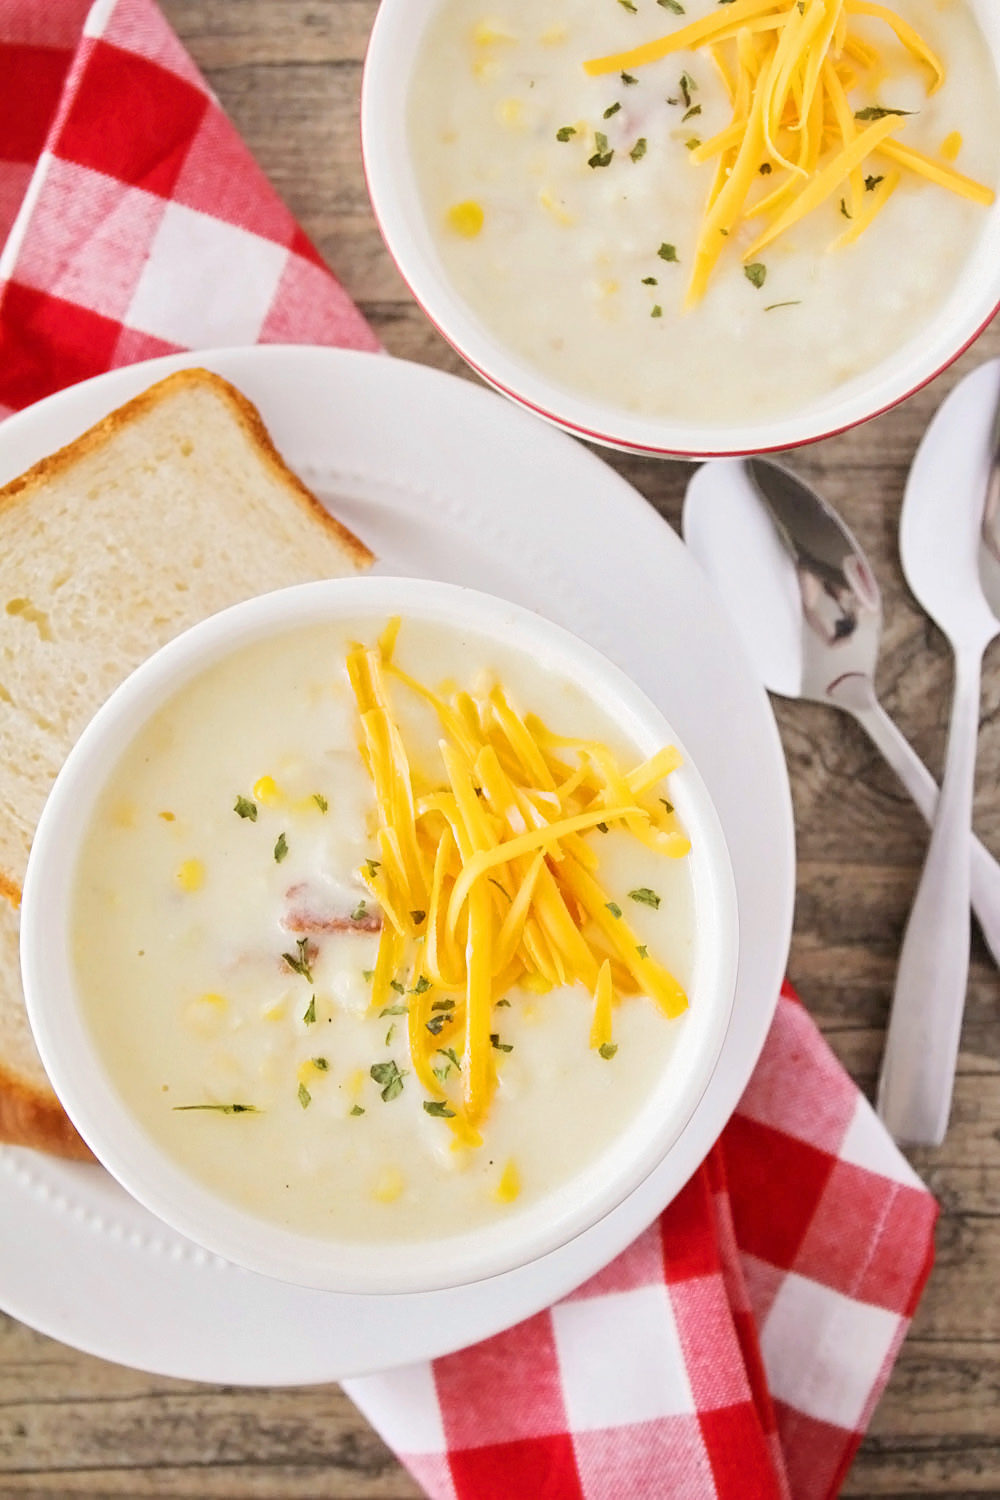 This savory and hearty corn chowder is so delicious and perfect for a chilly evening!